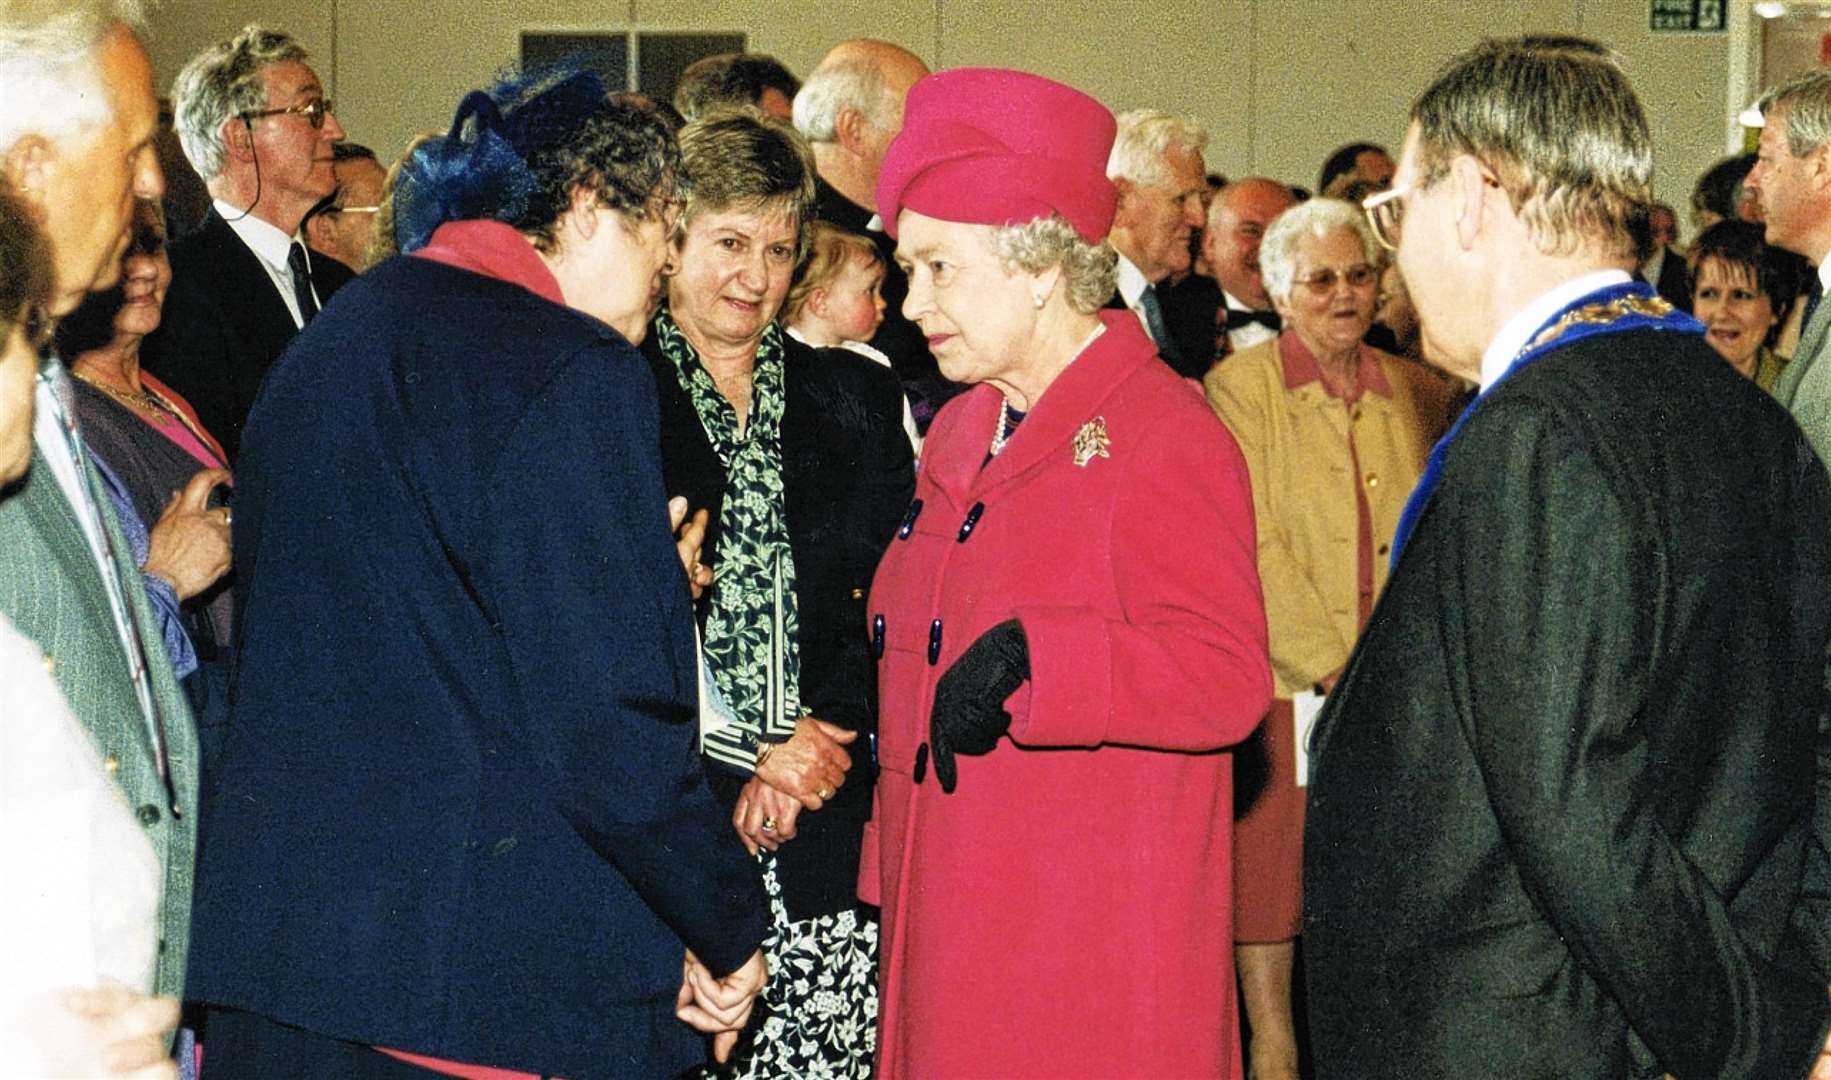 Sheila Moir and her husband Andy were among those invited to attend a civic reception held at the Assembly Rooms in Wick in honour of the Queen and Duke of Edinburgh, celebrating the Queen’s Golden Jubilee in 2002. Mrs Moir is seen on the left speaking to the Queen.